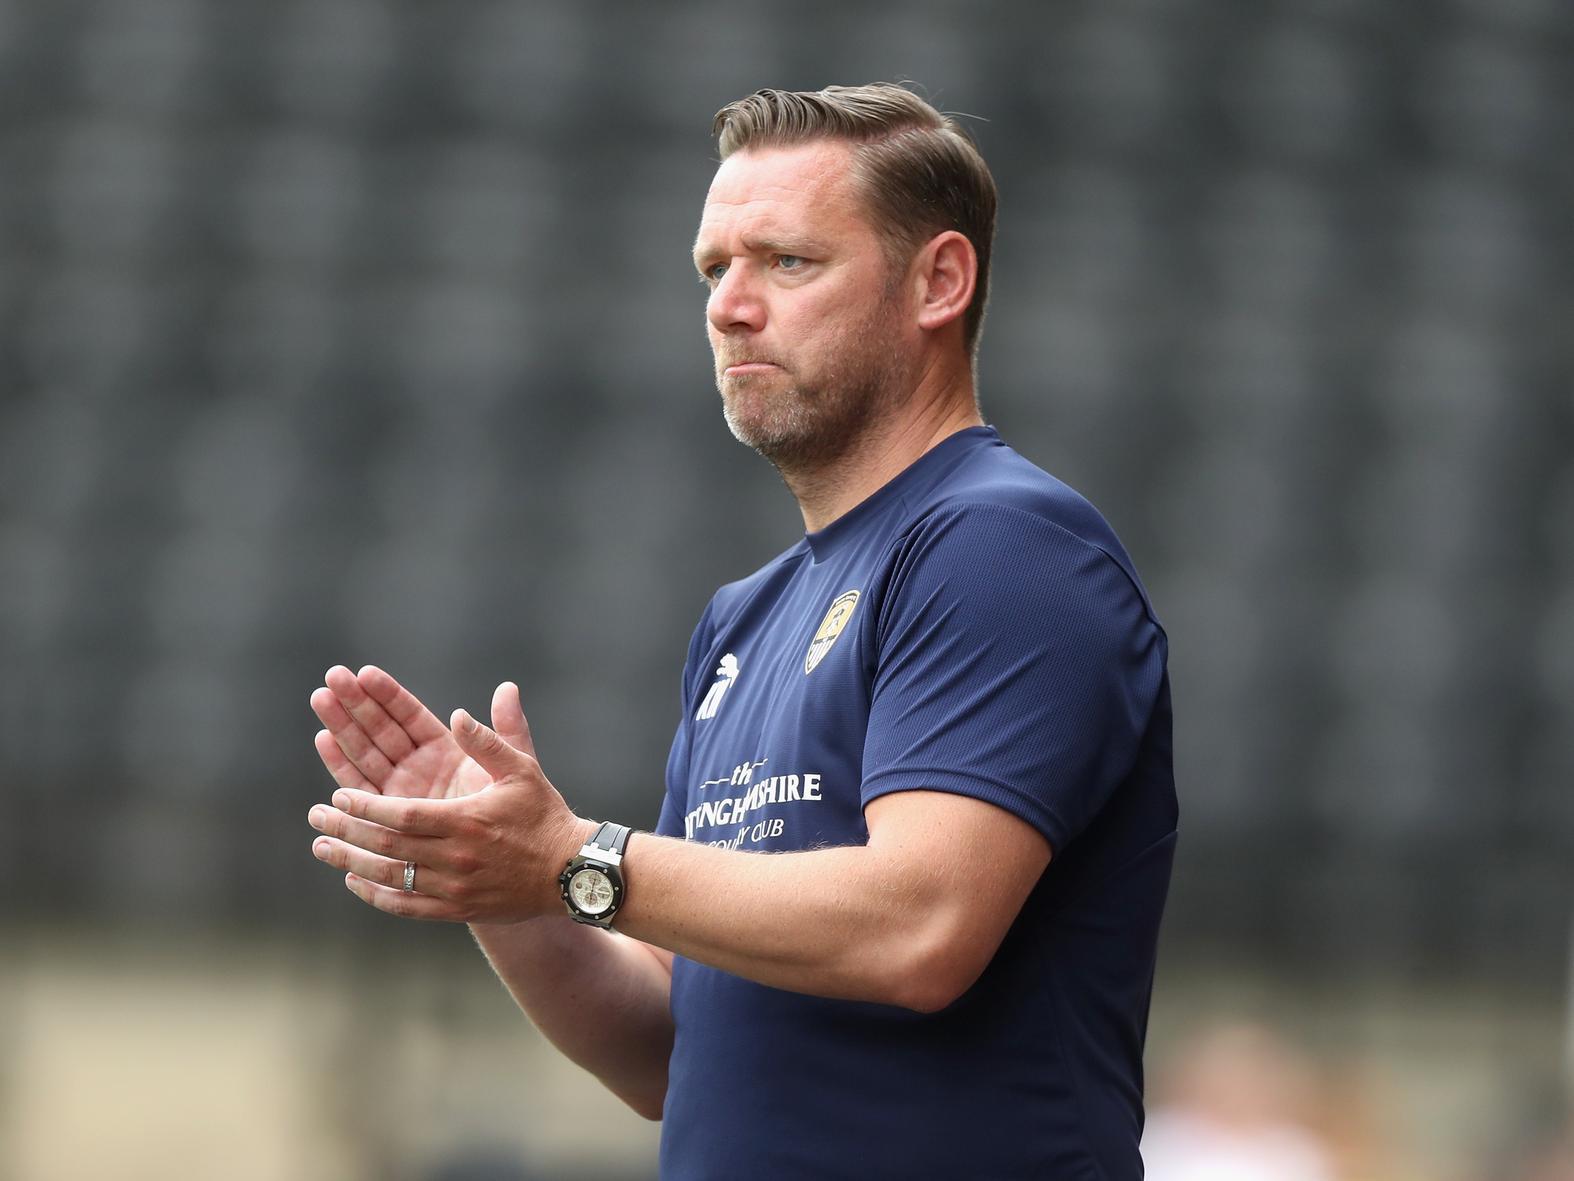 A dogged midfielder during his playing days at Bolton and West Ham, Nolan has turned his hand to management at Leyton Orient and most recently Notts County.